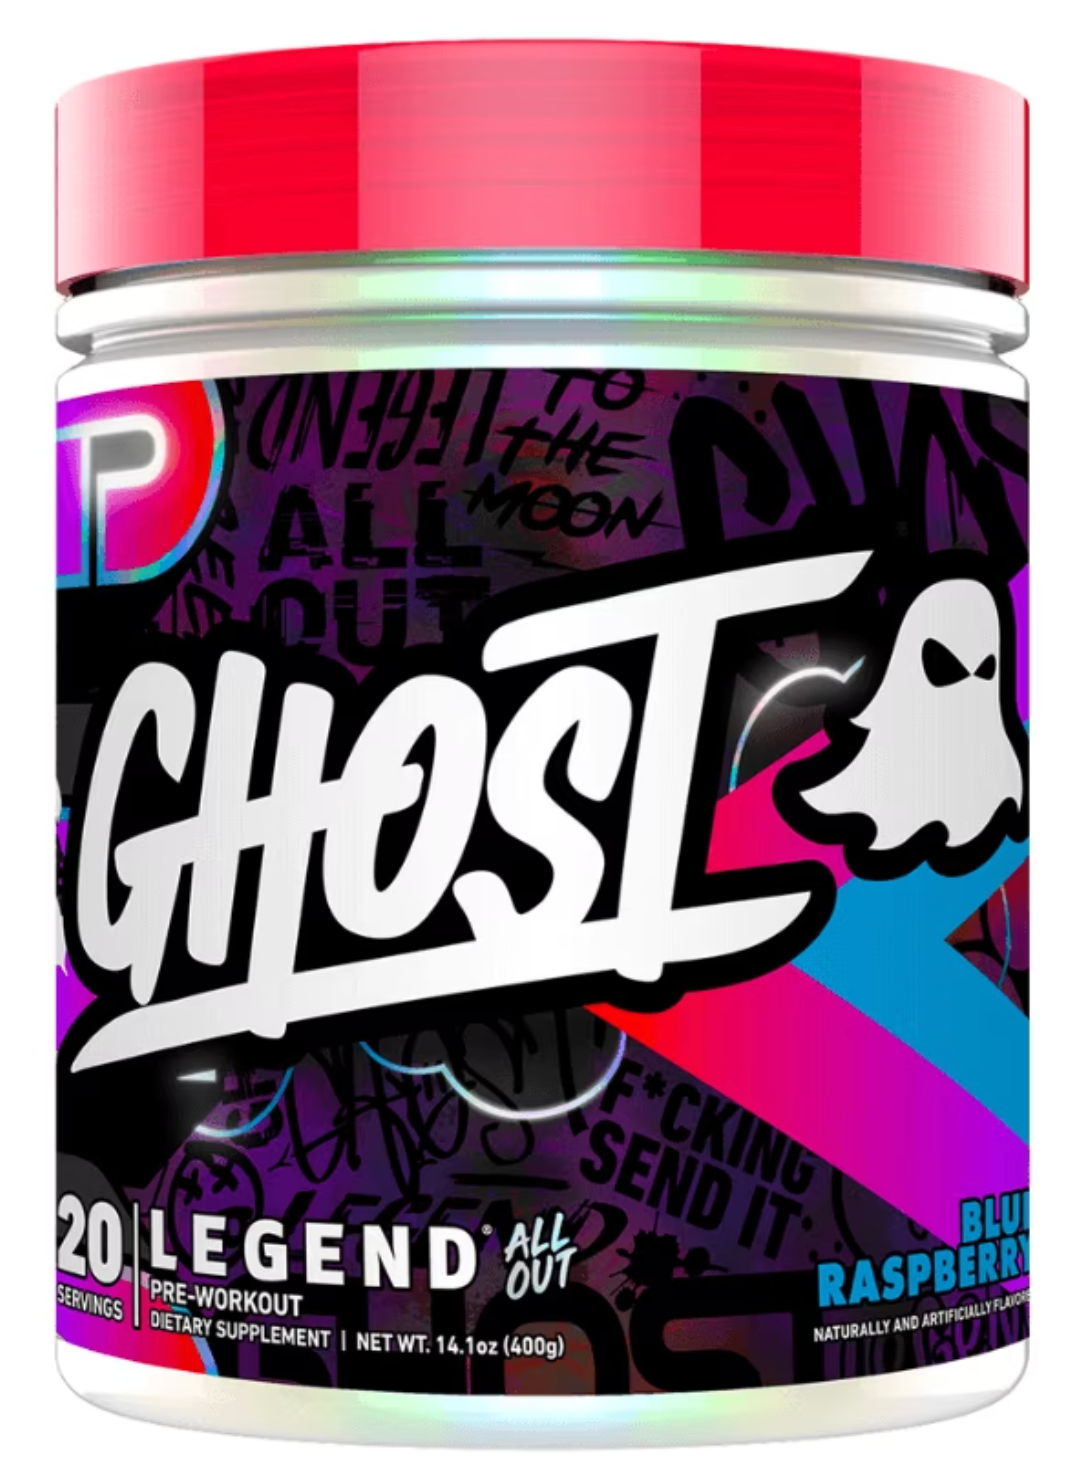 Ghost Legend ALL OUT Pre Workout